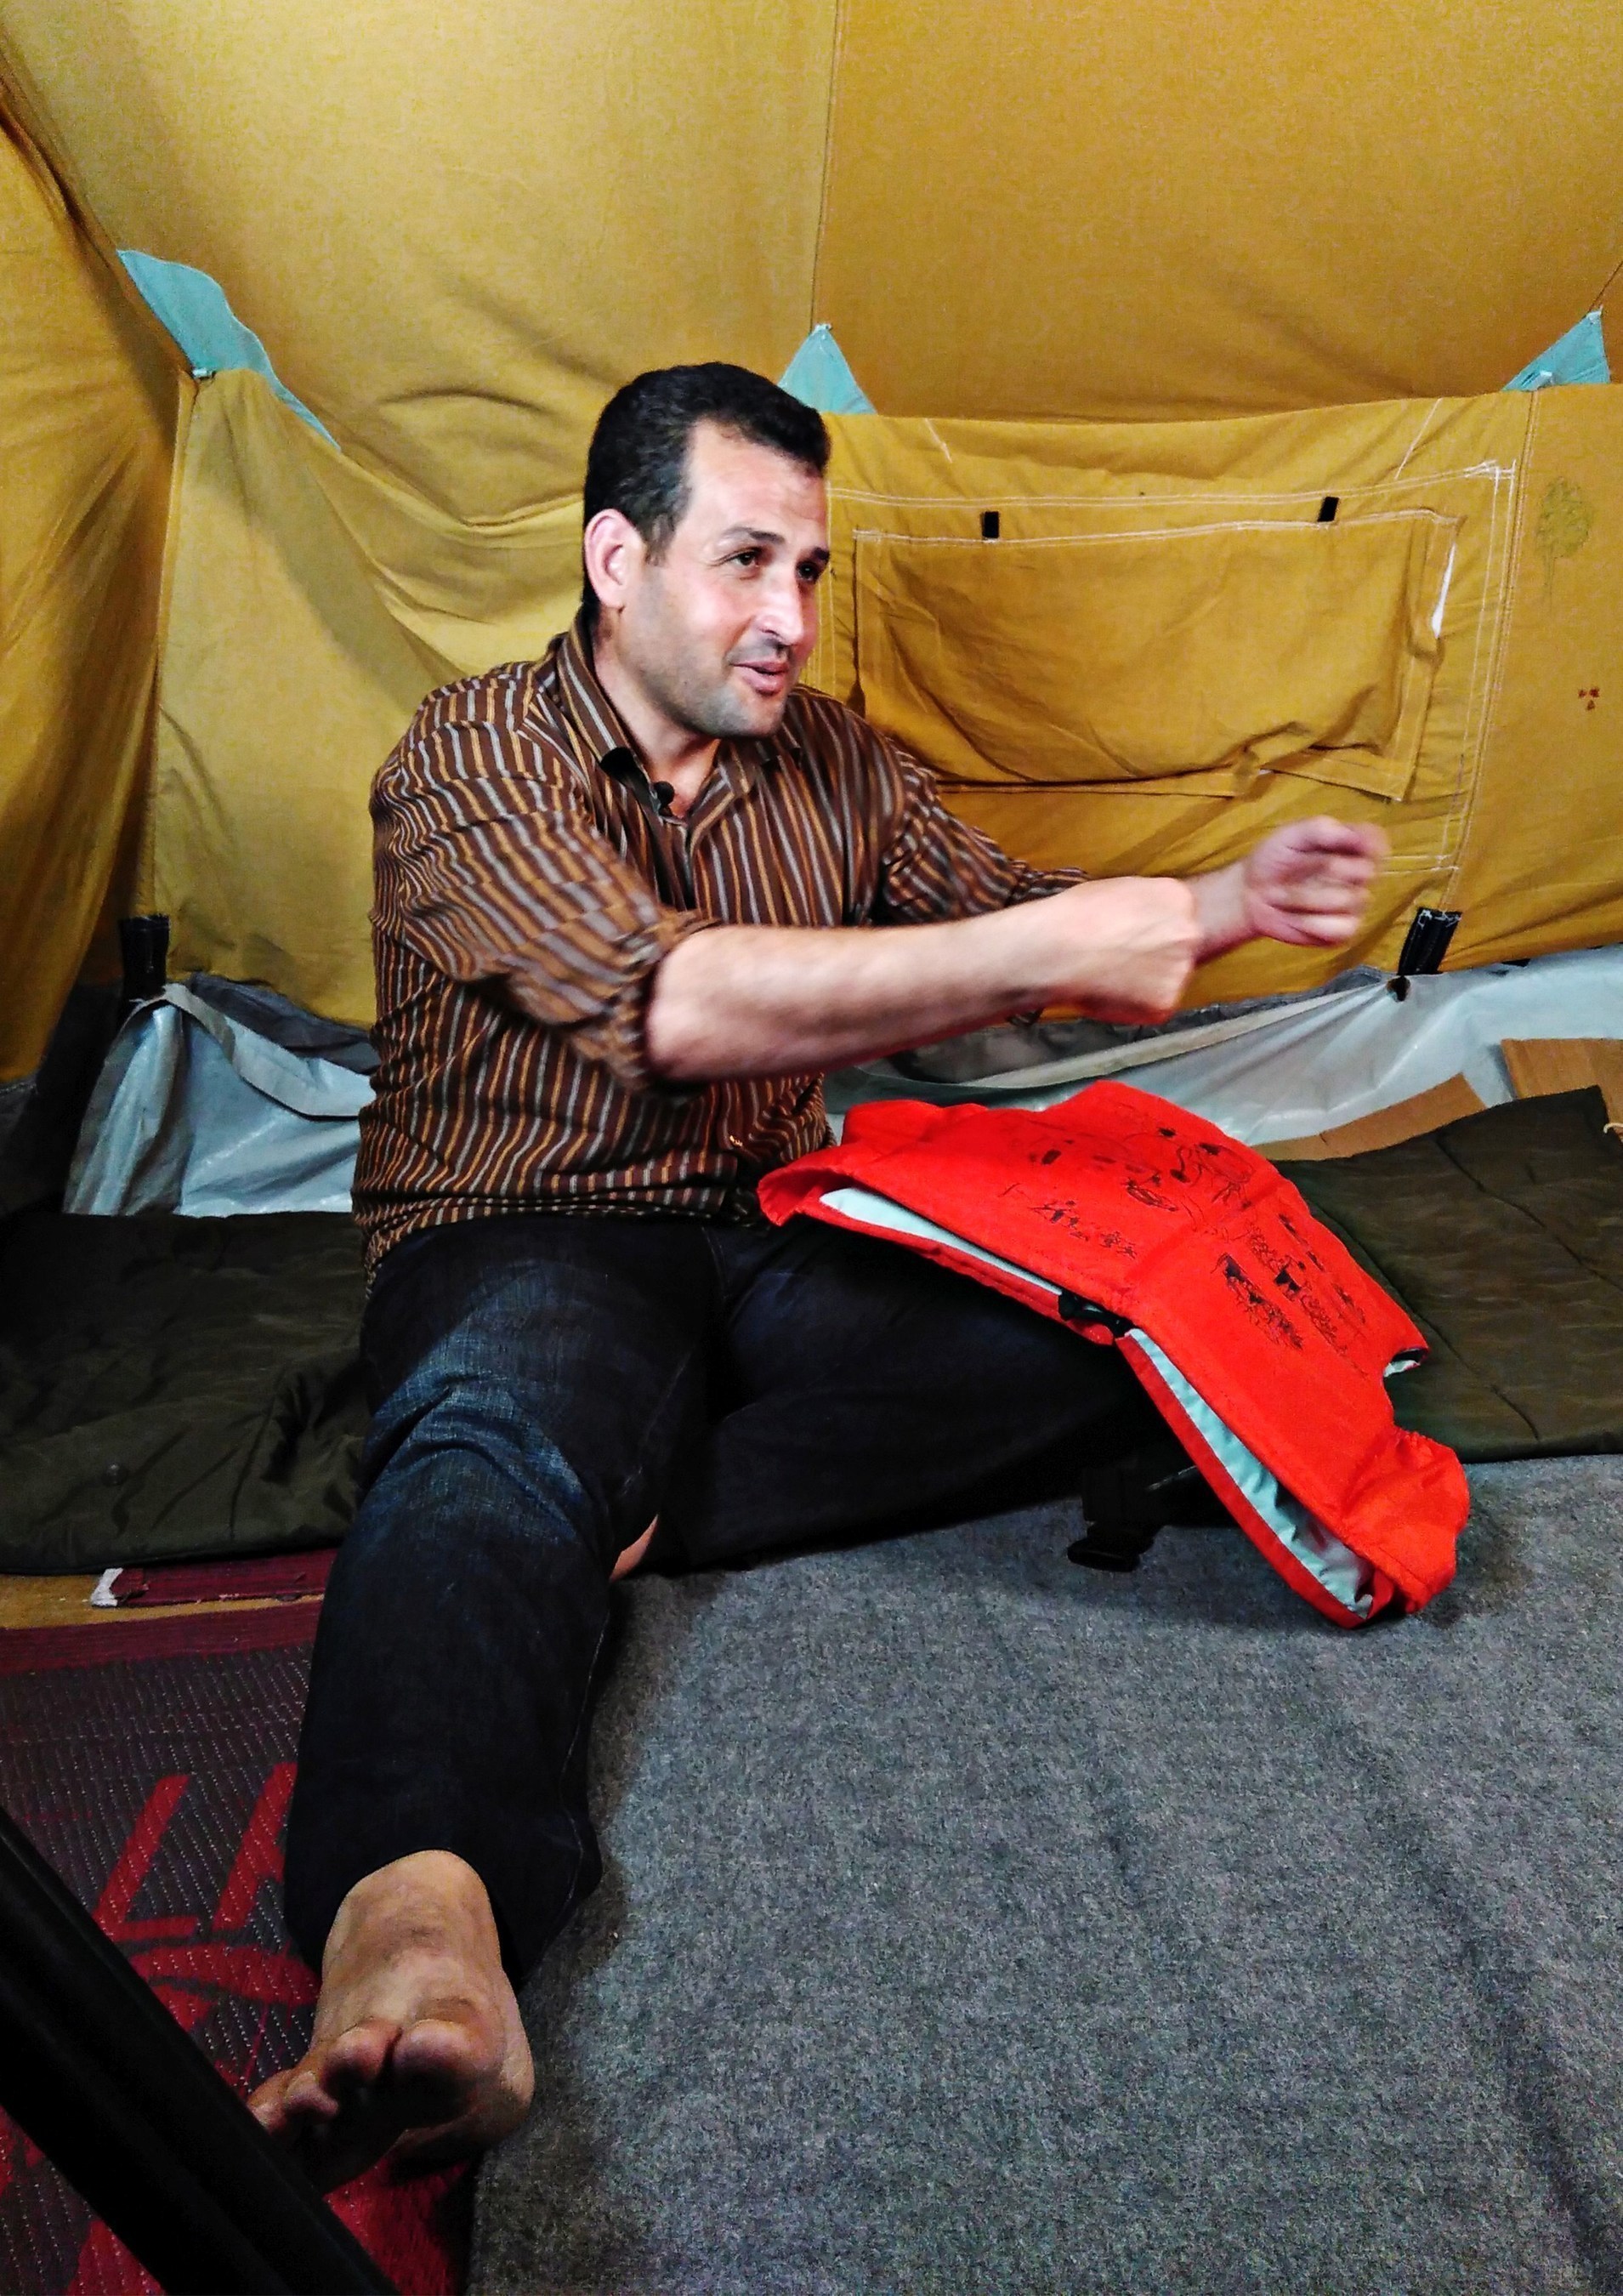 The 29 year old vet Farooq Saadi from Qamishli in Syria conversing in his tent in the "Oreokastro" refugee camp in Thessaloniki, Greece. On his knee is the life jacket bearing his life story. In October 2016, as part of "Project Life Jacket", the life stories of nine Syrian refugees were illustrated on life jackets used for the crossing to Lesbos.
Picture taken on the 7th October 2016 in Thessaloniki. (Project Life Jacket). (PRNewsFoto/Project Life Jacket)